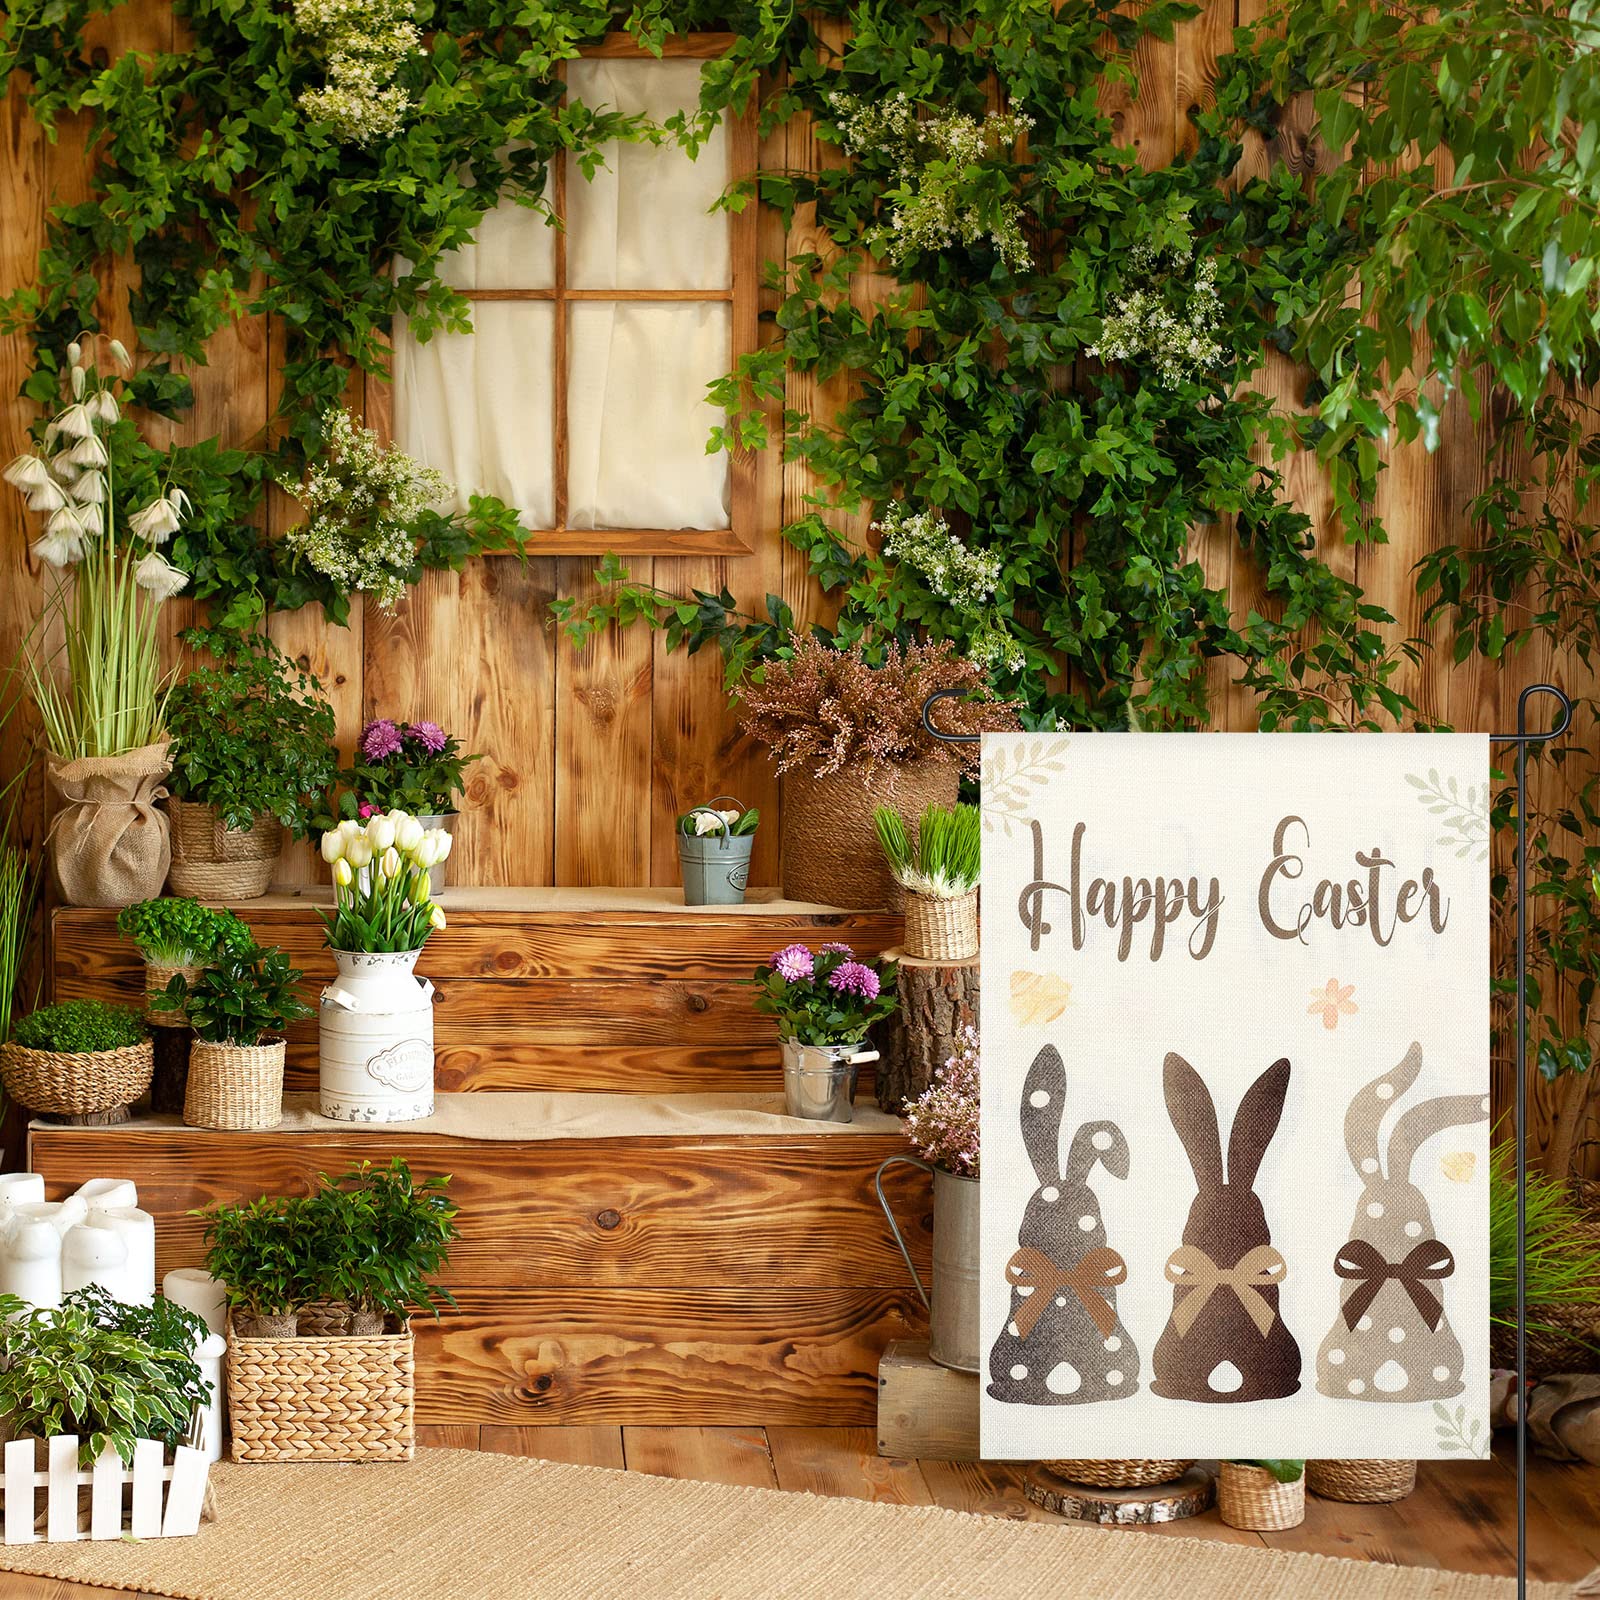 Happy Easter Bunnies Garden Flag 12 x 18 Inch Rabbit Garden Flag Double Sided Spring Garden Flag Burlap Small Polka Dots Brown Welcome Holiday Yard Flag for Easter Spring Holiday Outdoor Decor